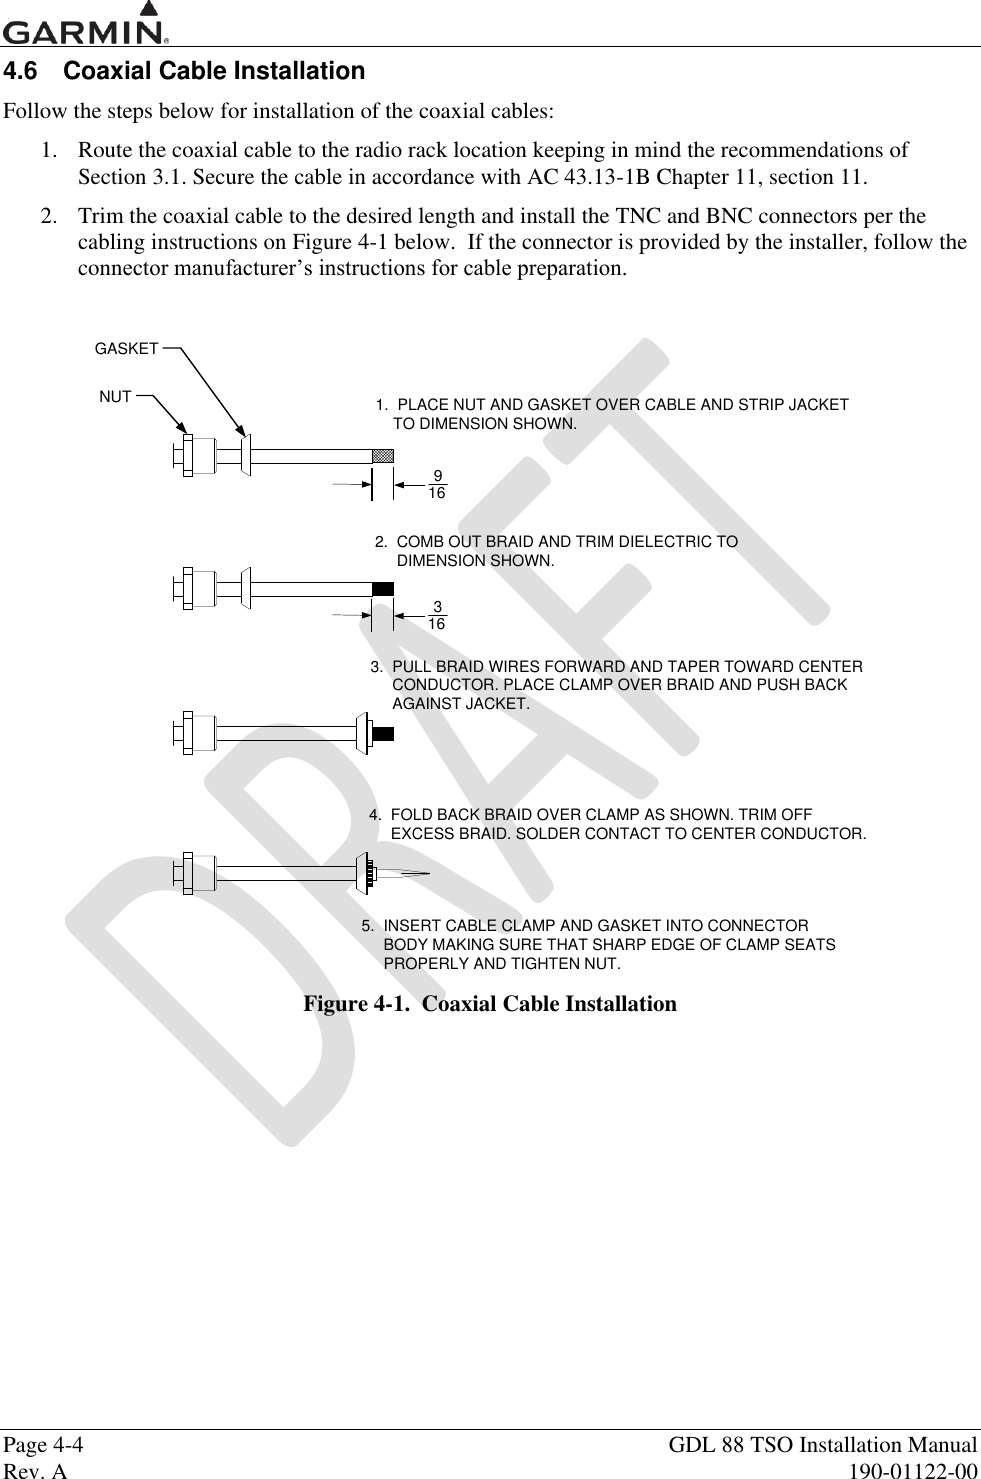  Page 4-4  GDL 88 TSO Installation Manual Rev. A  190-01122-00 4.6  Coaxial Cable Installation Follow the steps below for installation of the coaxial cables: 1. Route the coaxial cable to the radio rack location keeping in mind the recommendations of Section 3.1. Secure the cable in accordance with AC 43.13-1B Chapter 11, section 11.  2. Trim the coaxial cable to the desired length and install the TNC and BNC connectors per the cabling instructions on Figure 4-1 below.  If the connector is provided by the installer, follow the connector manufacturer‟s instructions for cable preparation.  GASKETNUT9163161.  PLACE NUT AND GASKET OVER CABLE AND STRIP JACKET    TO DIMENSION SHOWN.2.  COMB OUT BRAID AND TRIM DIELECTRIC TO     DIMENSION SHOWN.3.  PULL BRAID WIRES FORWARD AND TAPER TOWARD CENTER     CONDUCTOR. PLACE CLAMP OVER BRAID AND PUSH BACK     AGAINST JACKET.4.  FOLD BACK BRAID OVER CLAMP AS SHOWN. TRIM OFF     EXCESS BRAID. SOLDER CONTACT TO CENTER CONDUCTOR.5.  INSERT CABLE CLAMP AND GASKET INTO CONNECTOR     BODY MAKING SURE THAT SHARP EDGE OF CLAMP SEATS     PROPERLY AND TIGHTEN NUT. Figure 4-1.  Coaxial Cable Installation 